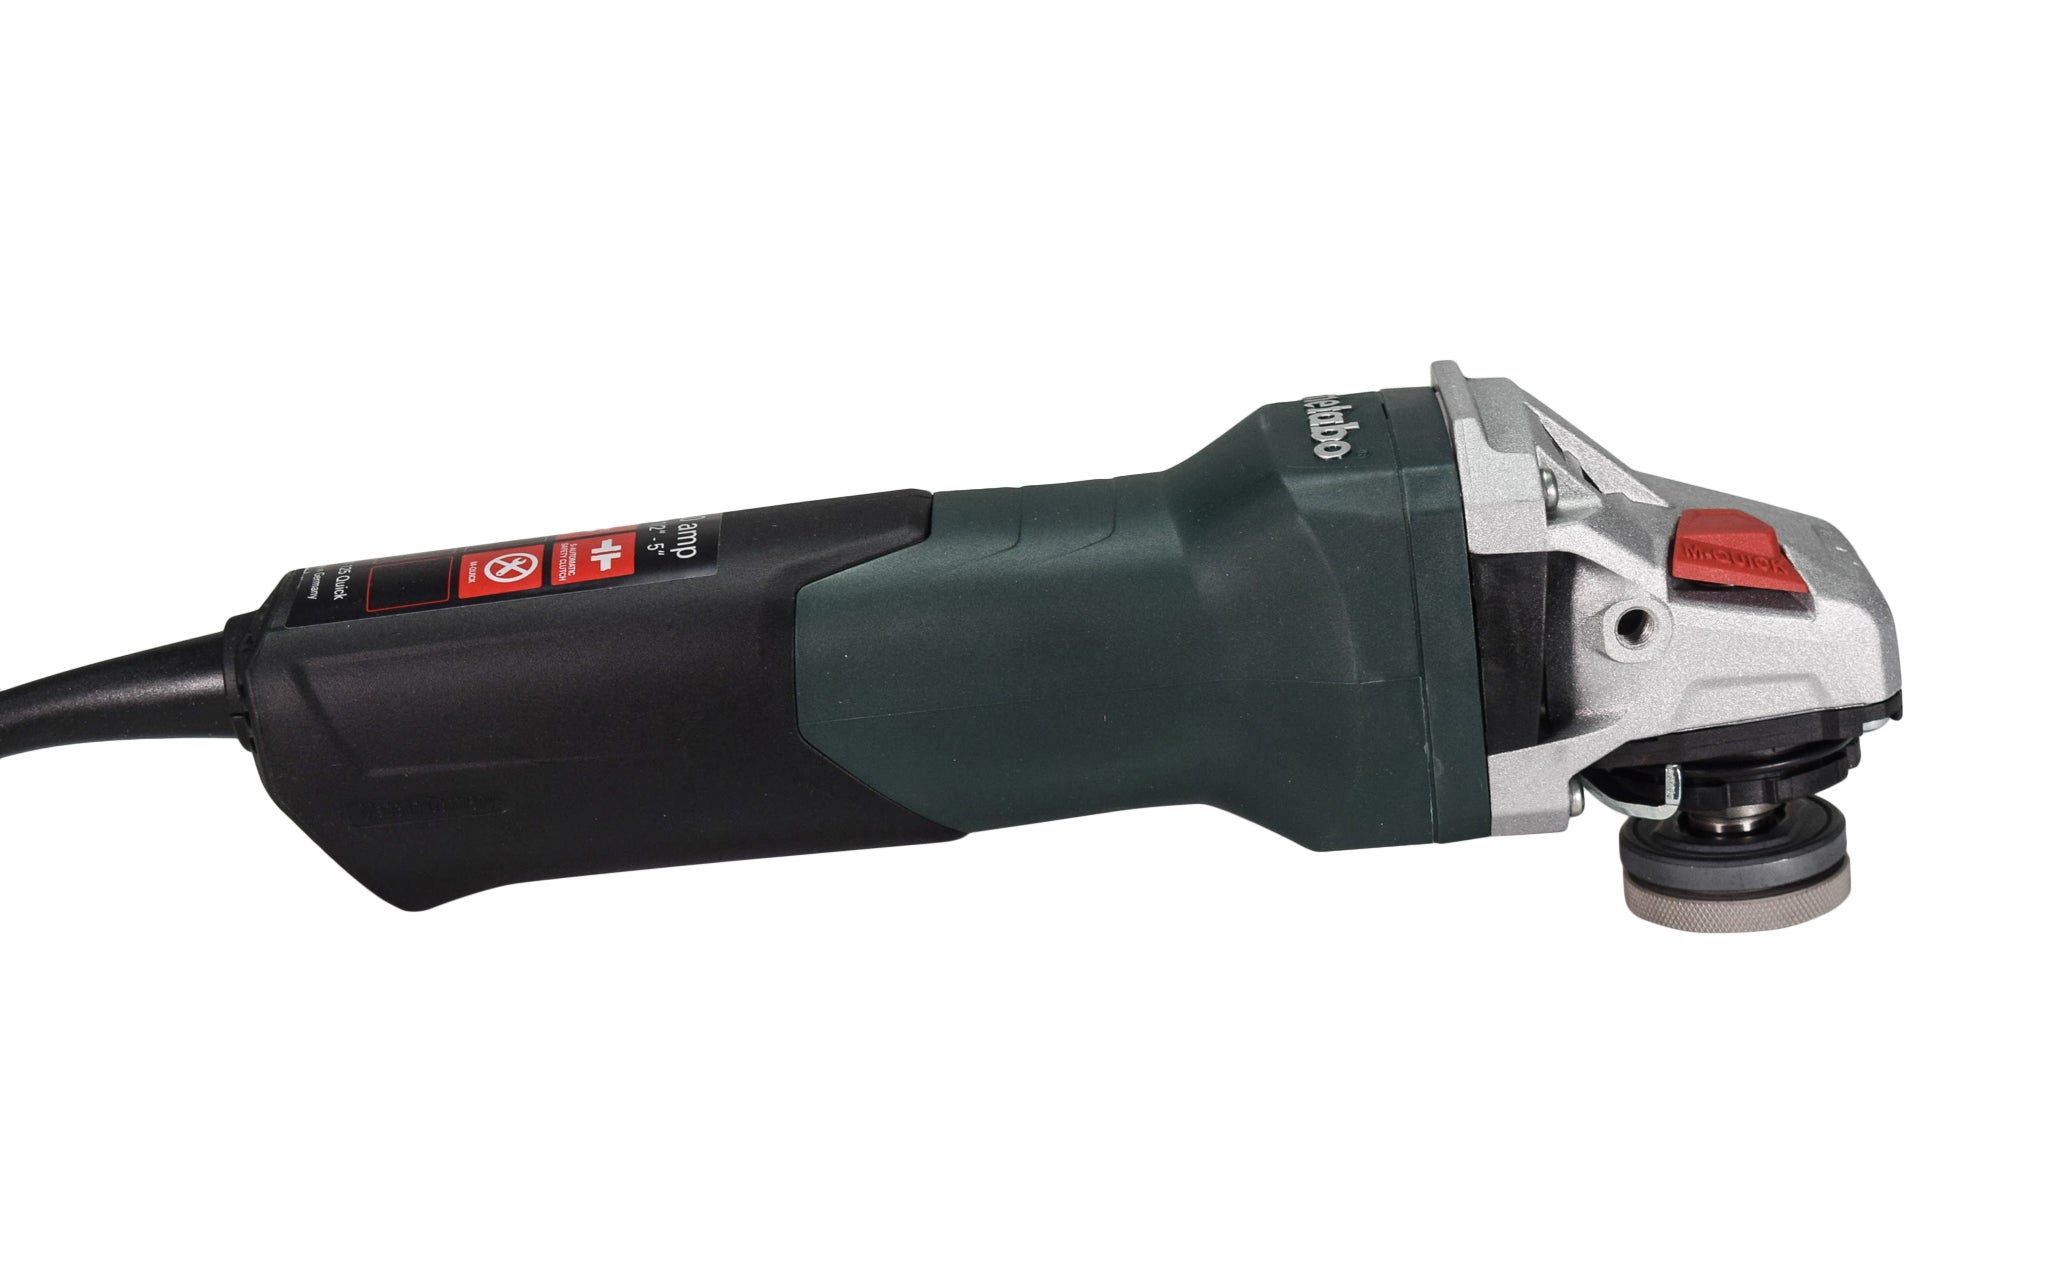 Metabo-603623420-4.5-inch-5-inch-Angle-Grinder-11-000-Rpm-11.0-Amps-with-Lock-on-image-8